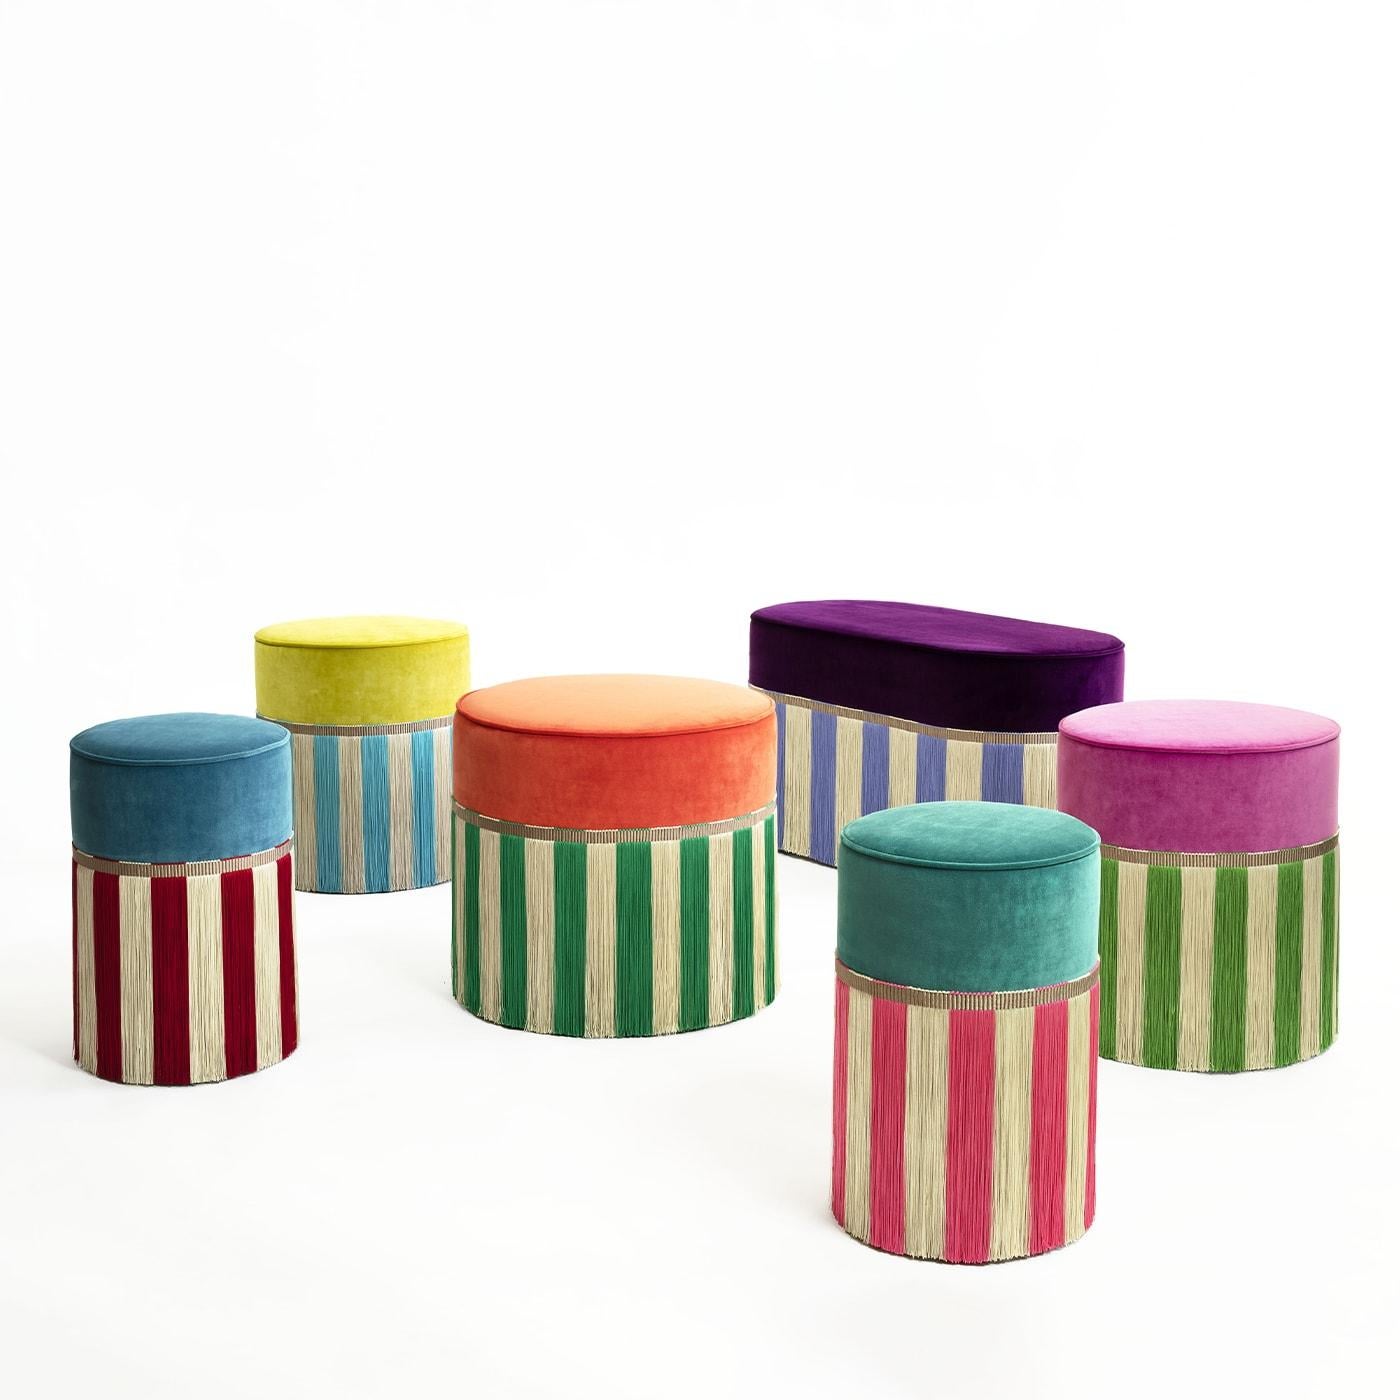 A vibrant turquoise hue was selected for the plush seat of this cylindrical ottoman, a seating solution whose stylish appeal is sealed by the striped design of its viscose fringes outlining a pink and white striped design. The sturdy beech core